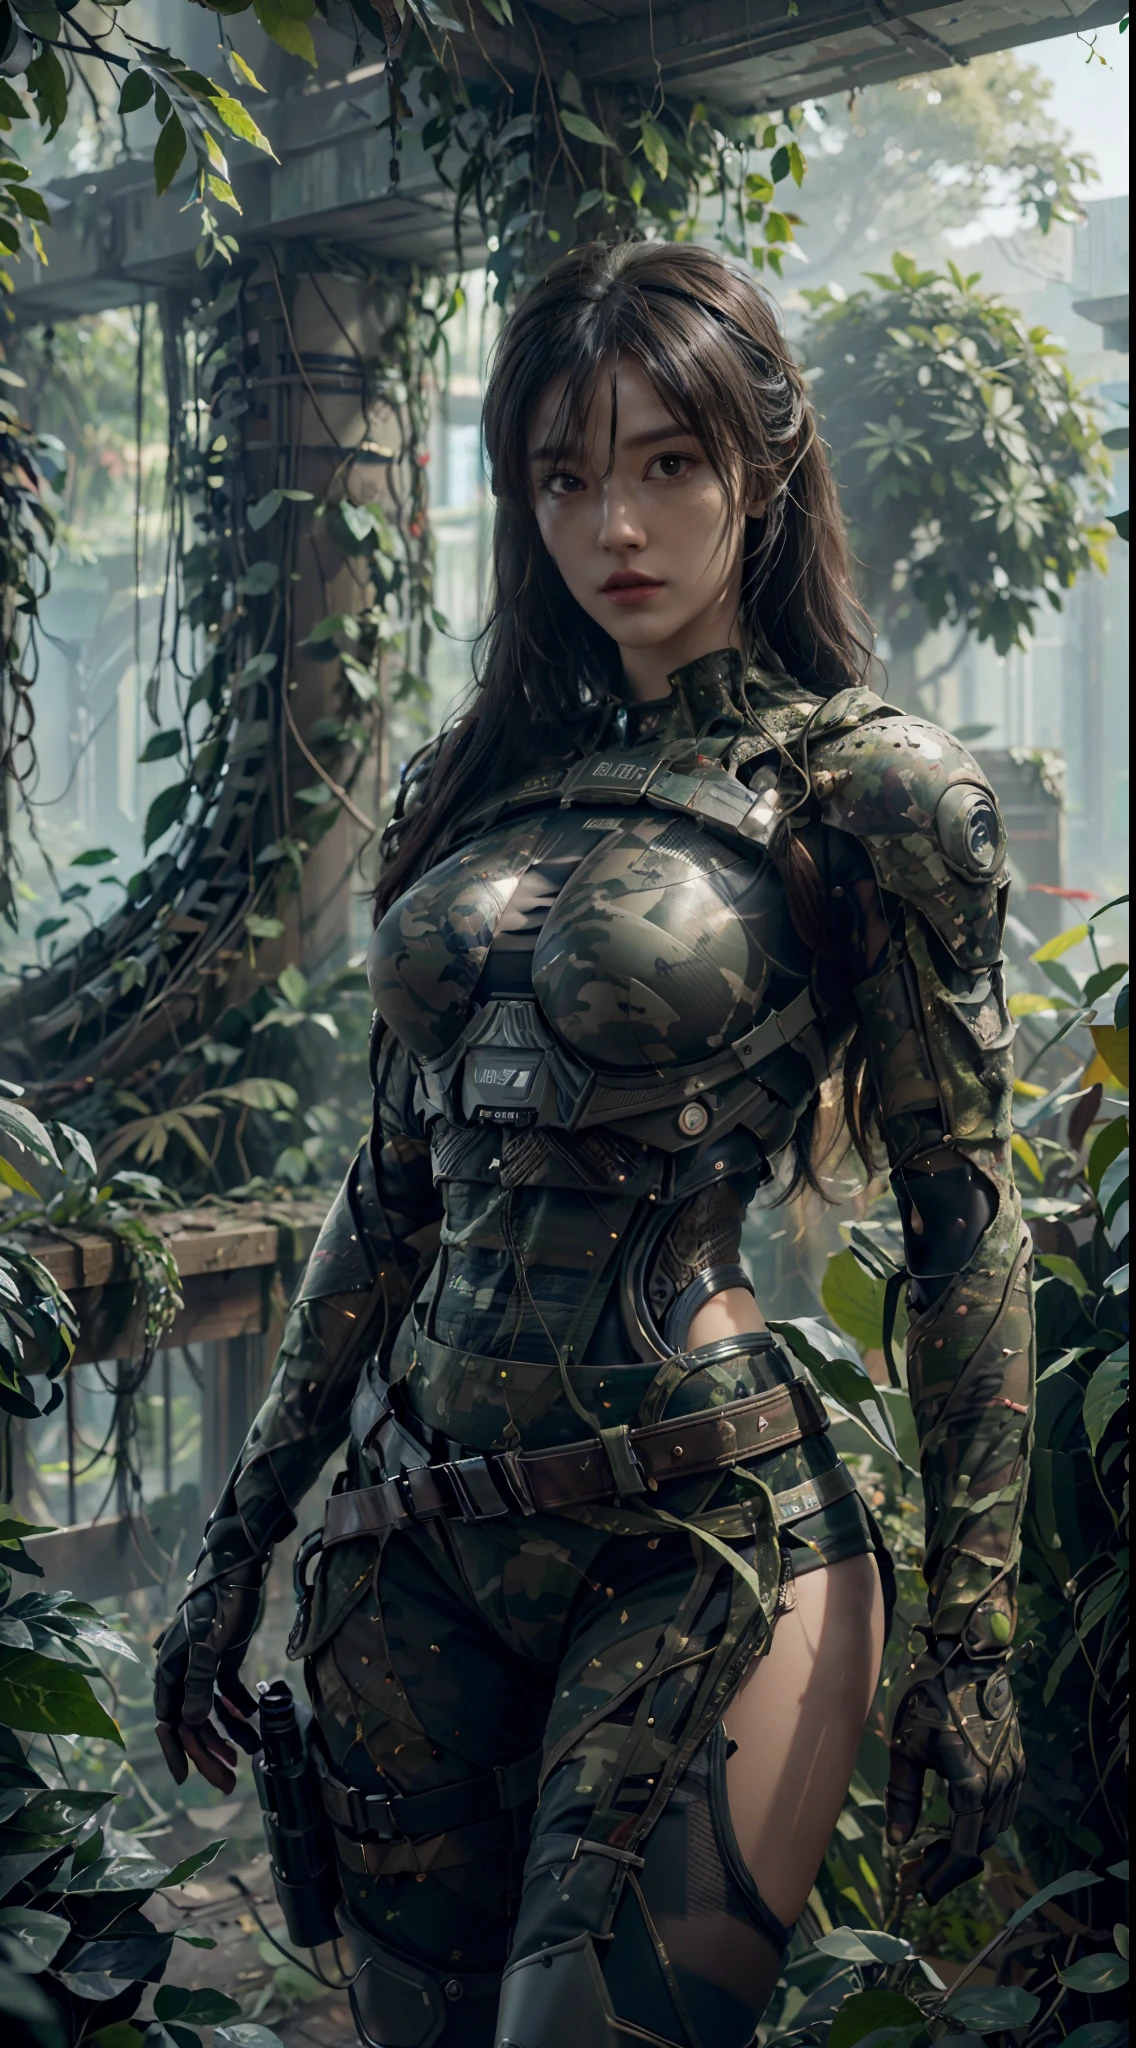 ((Best quality)), ((masterpiece)), (highly detailed:1.3), 3D, beautiful (cyberpunk:1.2) special forces, robort,female with thick voluminous hair wearing (wearing camouflage_uniform:1.1), body armour,cape,digital (camouflage:1.3),HDR (High Dynamic Range),Ray Tracing,NVIDIA RTX,Super-Resolution,Unreal 5,Subsurface scattering,PBR Texturing,Post-processing,Anisotropic Filtering,Depth-of-field,Maximum clarity and sharpness,Multi-layered textures,Albedo and Specular maps,Surface shading,Accurate simulation of light-material interaction,Perfect proportions,Octane Render,Two-tone lighting,Wide aperture,Low ISO,White balance,Rule of thirds,8K RAW,Efficient Sub-Pixel,sub-pixel convolution